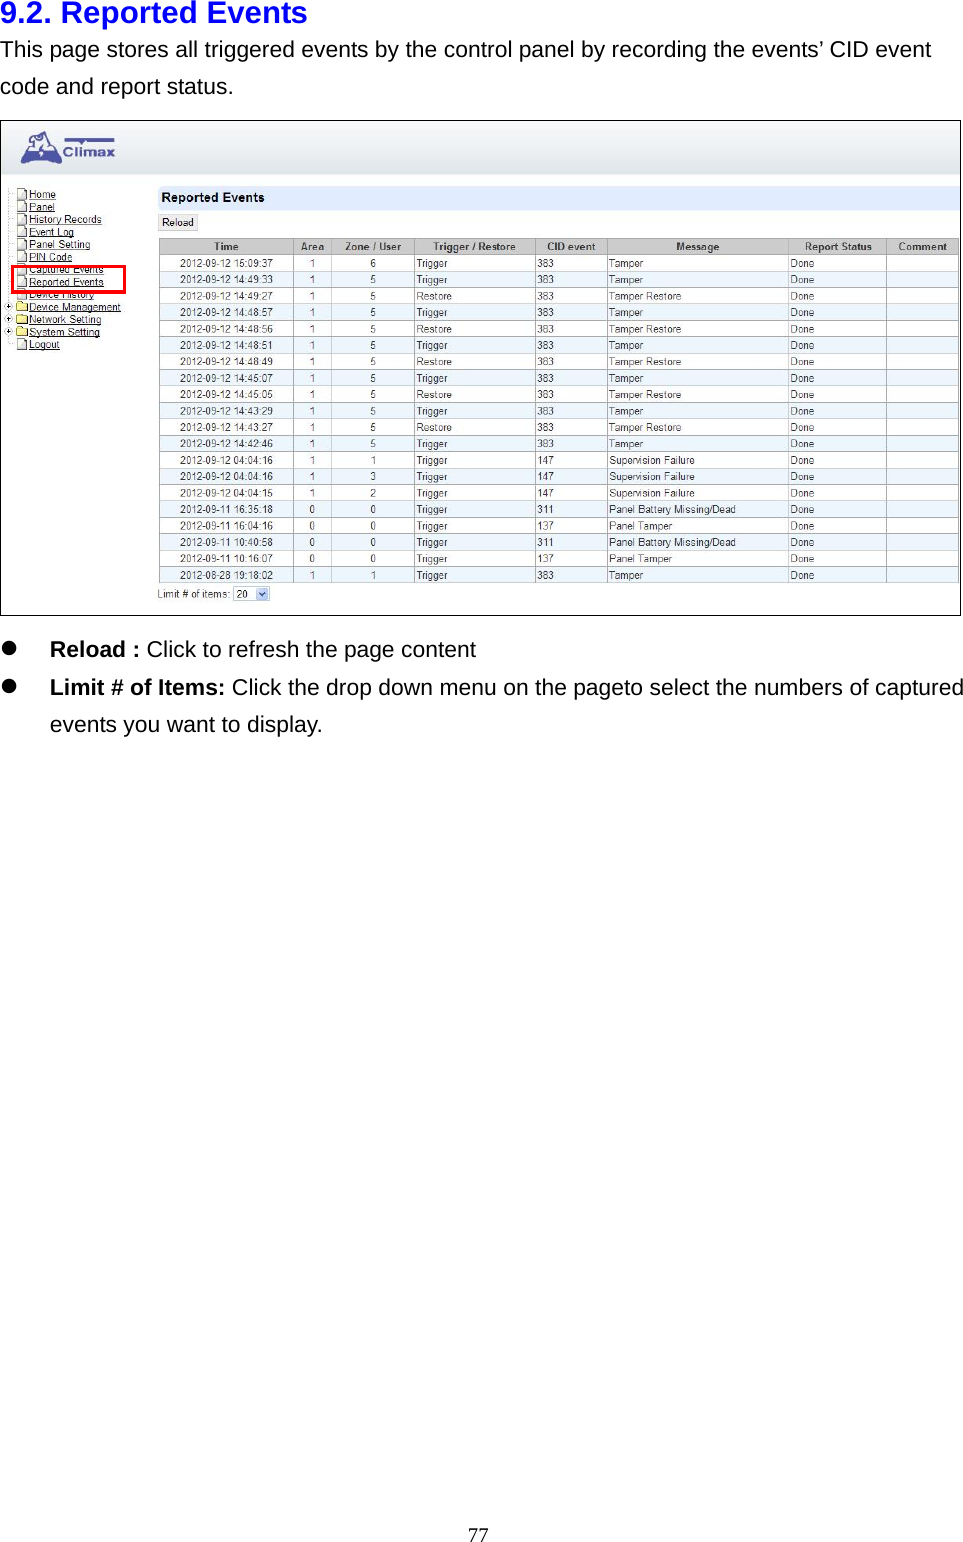  779.2. Reported Events     This page stores all triggered events by the control panel by recording the events’ CID event code and report status.   Reload : Click to refresh the page content      Limit # of Items: Click the drop down menu on the pageto select the numbers of captured events you want to display.                         